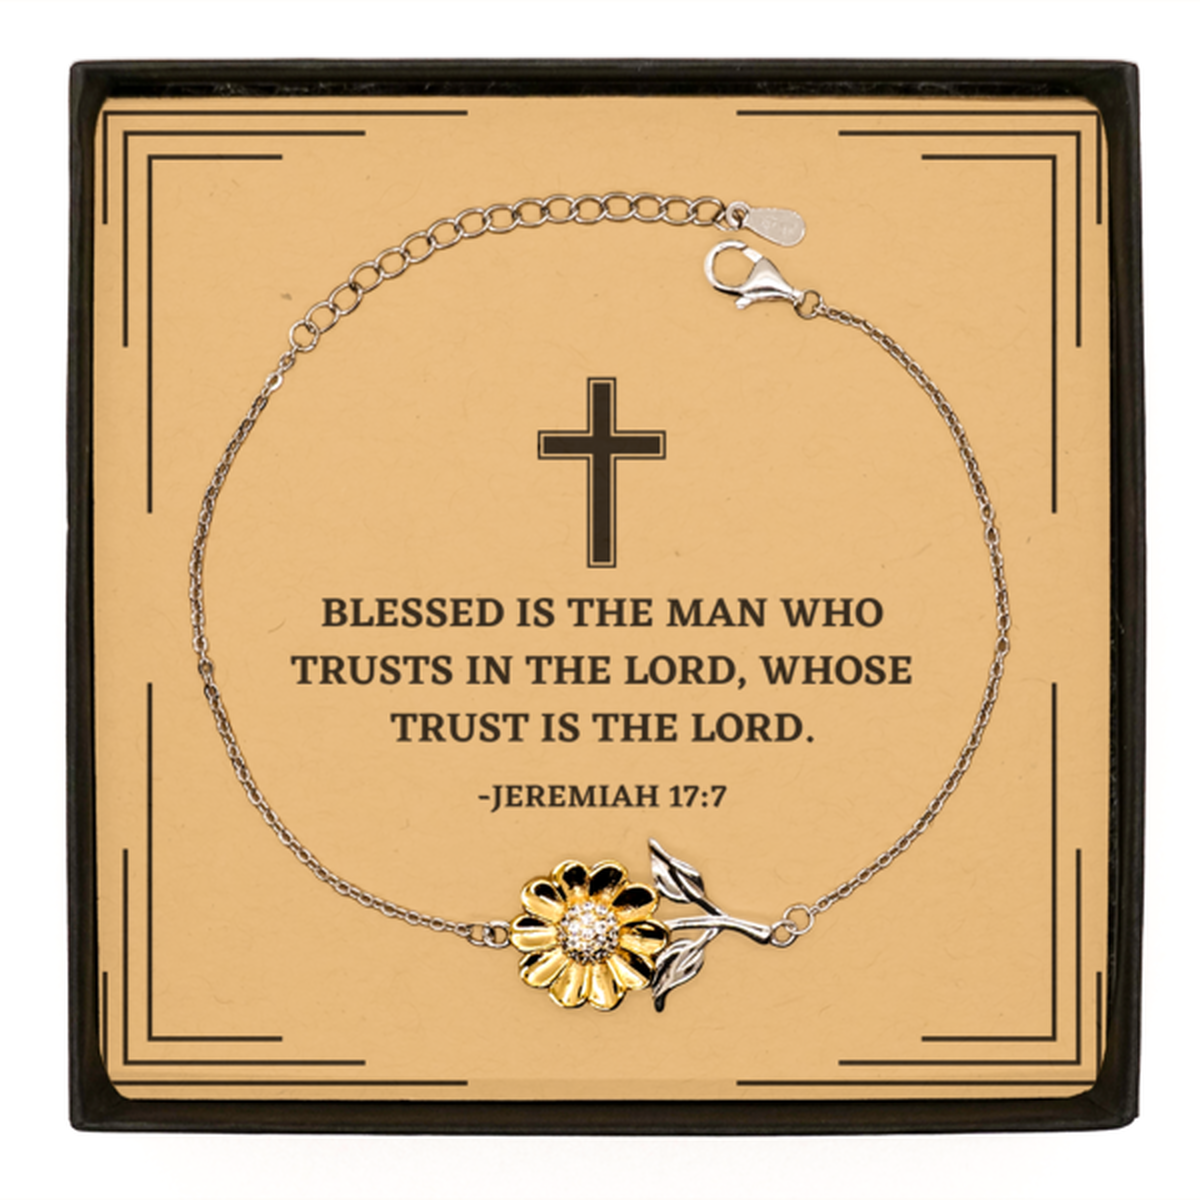 Baptism Gifts For Teenage Boys Girls, Christian Bible Verse Sterling Silver Sunflower Bracelet, Blessed is the man who trusts, Confirmation Gifts, Bible Verse Card for Son, Godson, Grandson